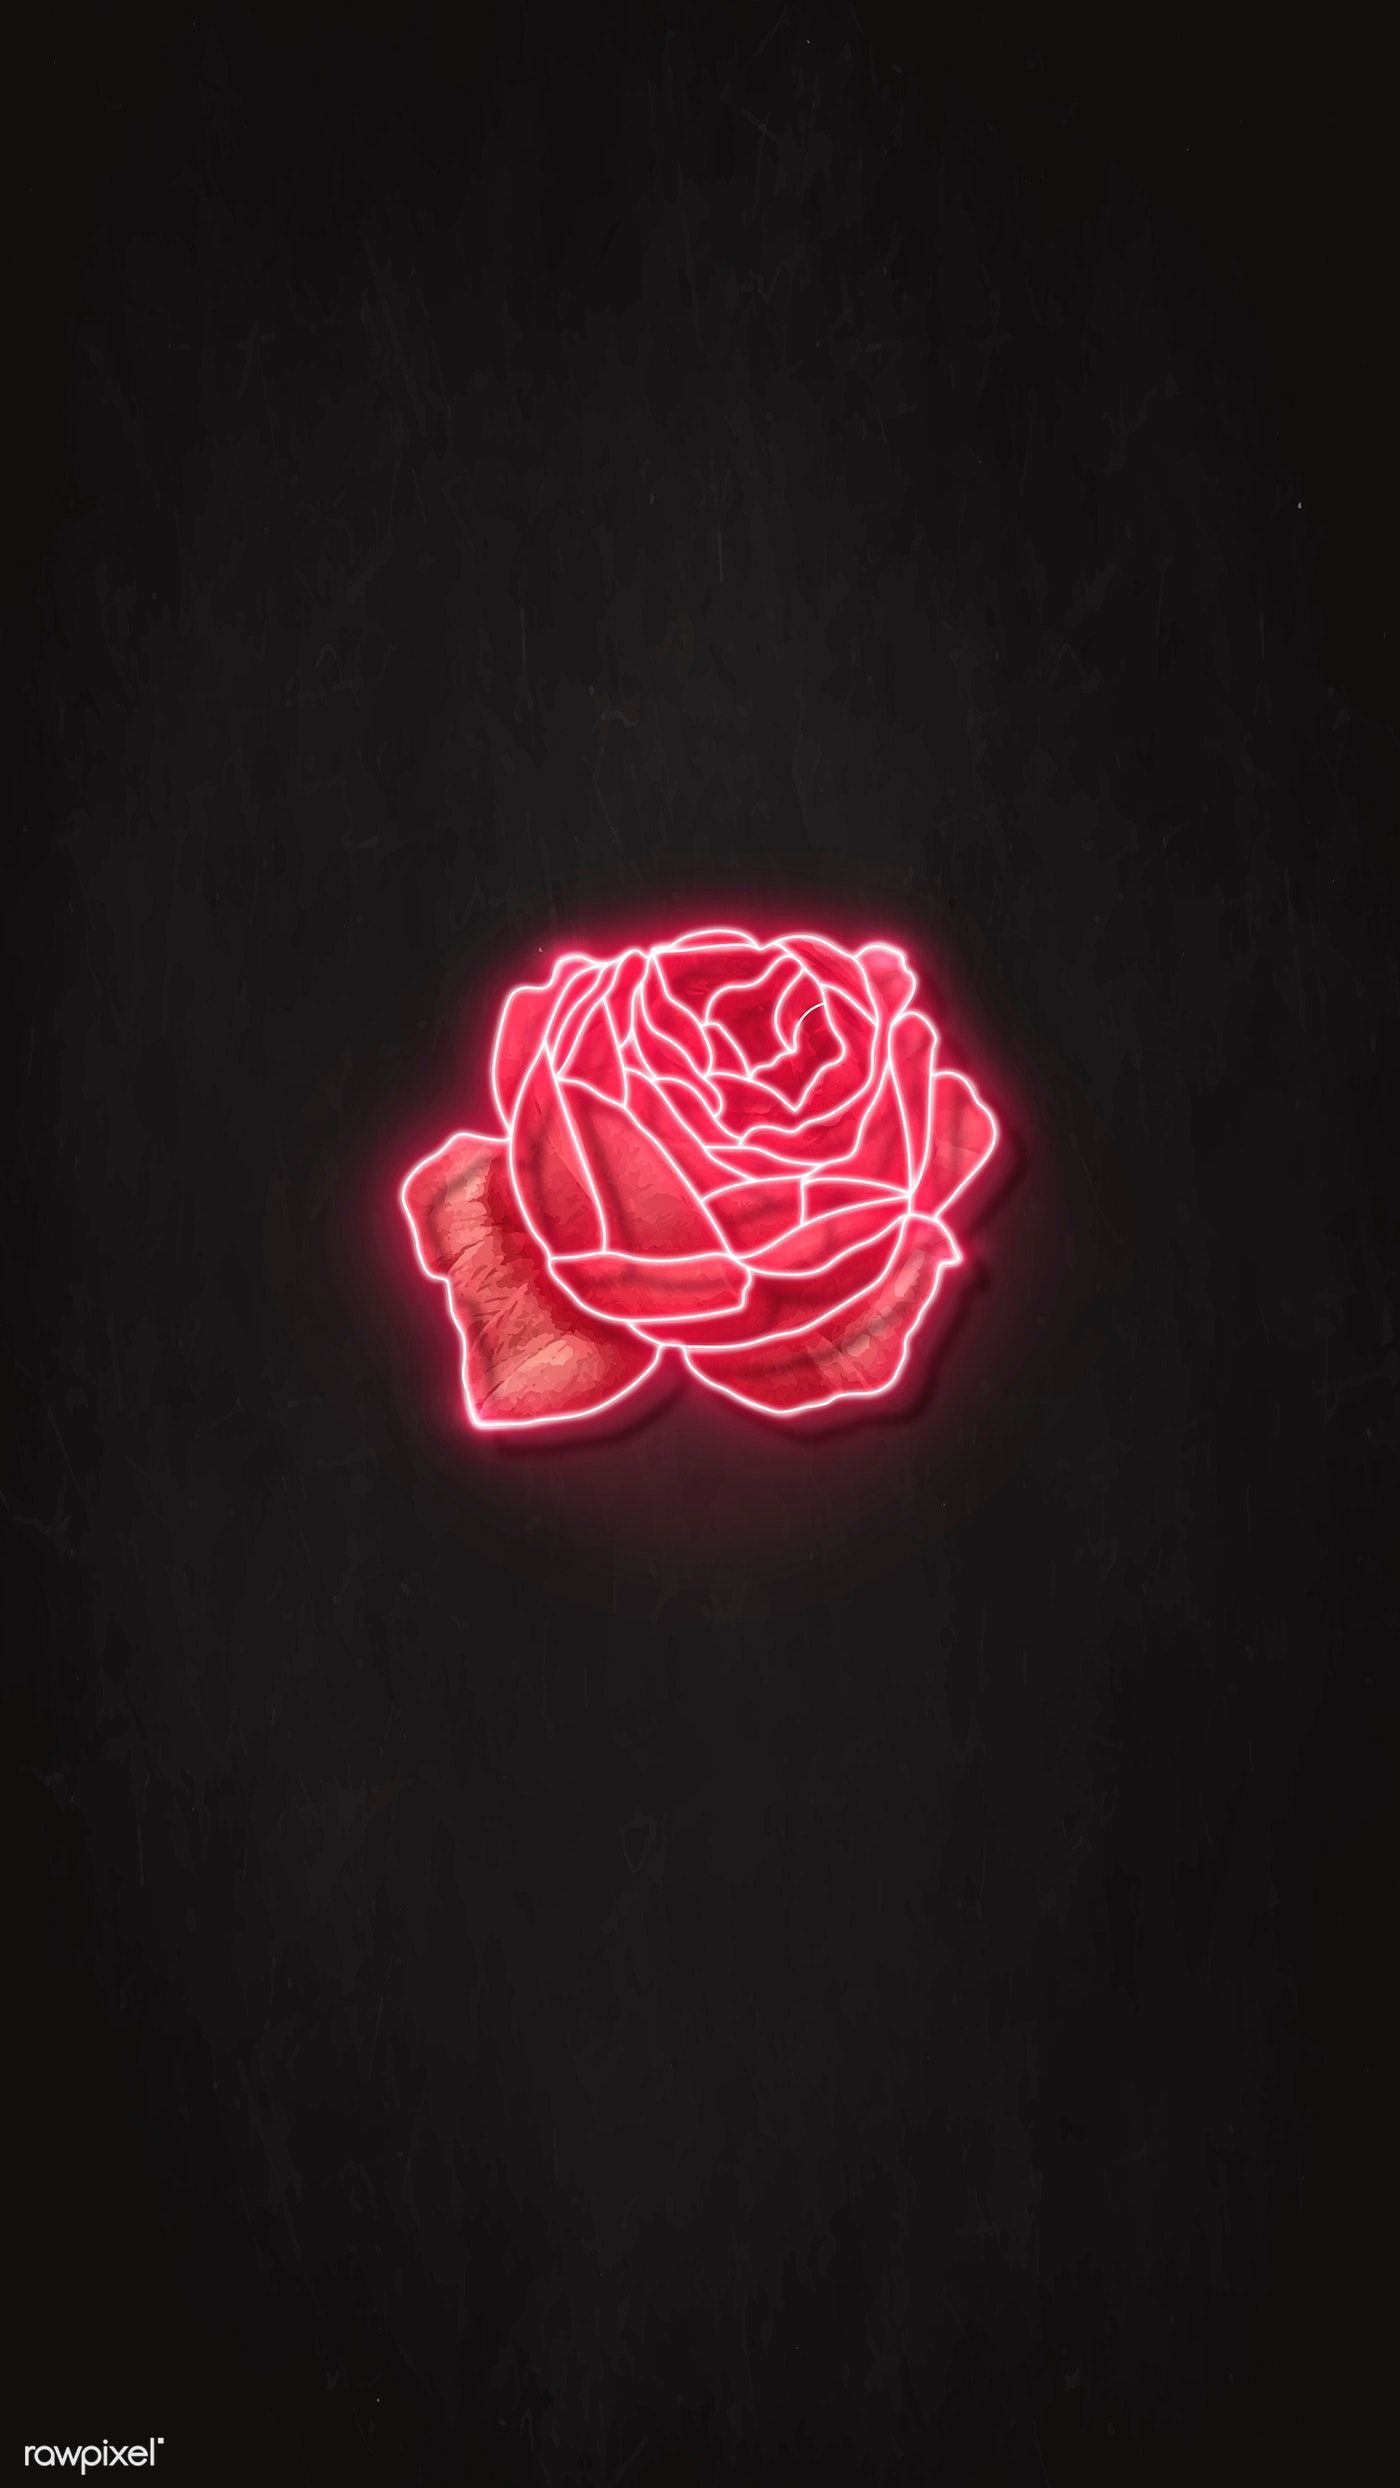 A neon rose on black background - Neon red